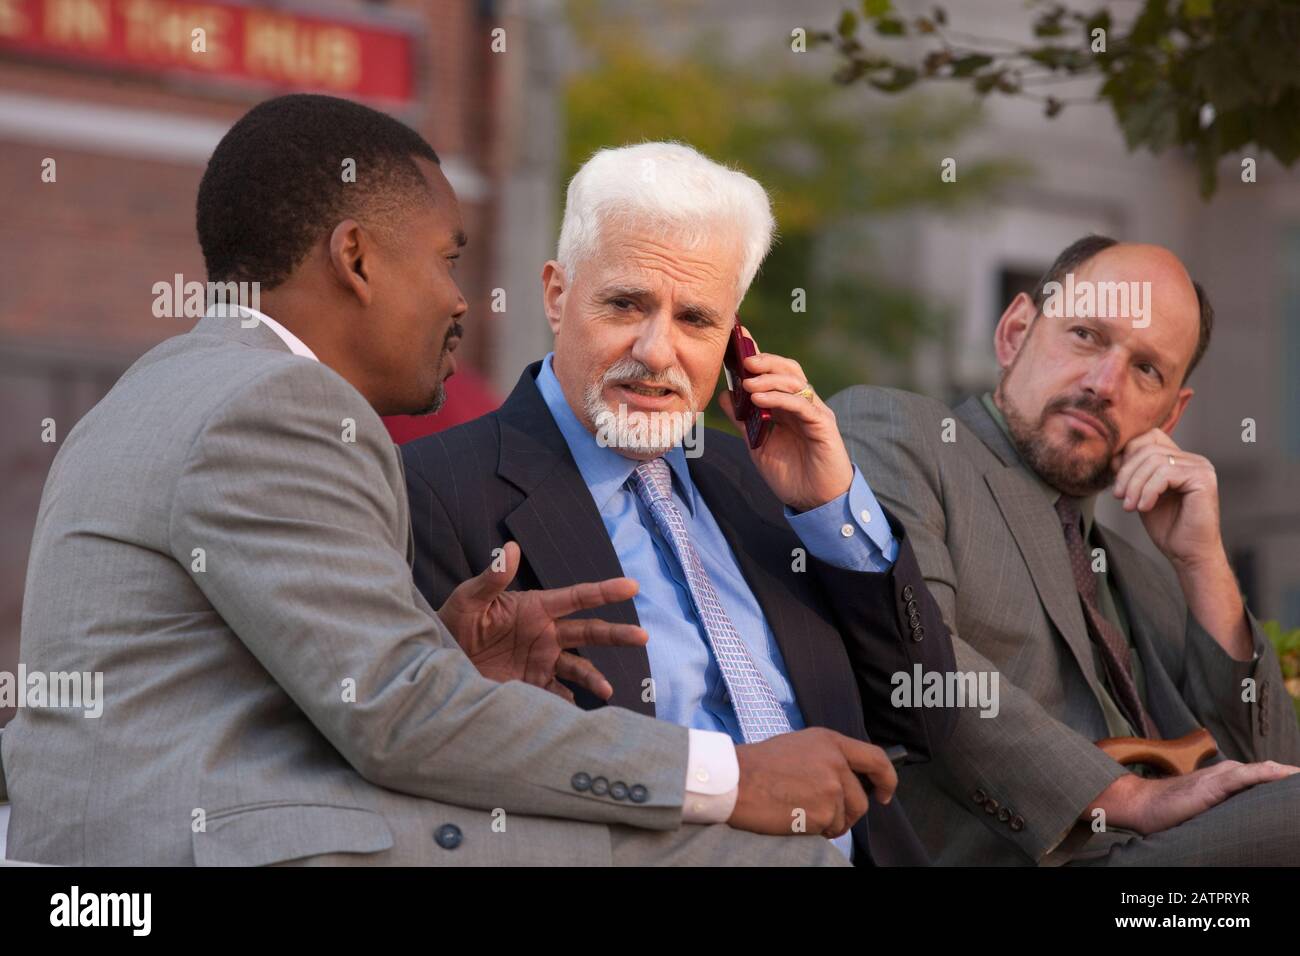 Businessmen talking and sharing insights while one is on a cellphone Stock Photo